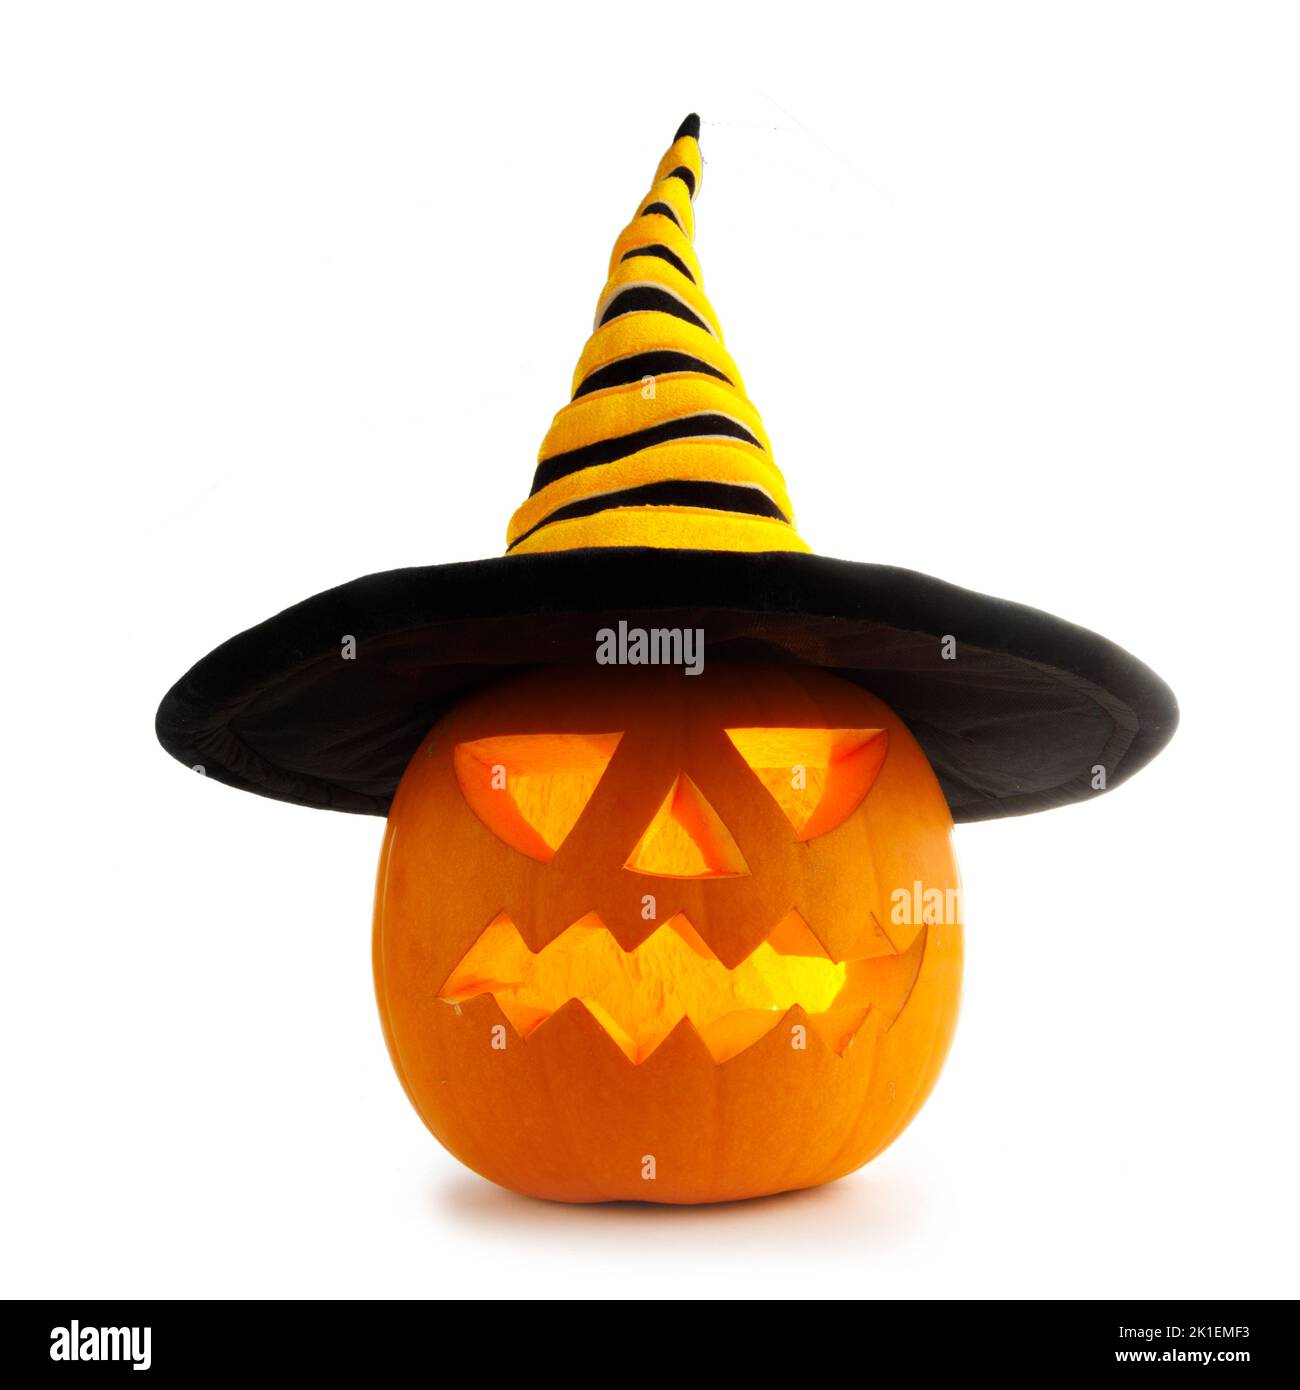 Funny Jack O Lantern Halloween pumpkin wearing witches hat isolated on white background Stock Photo